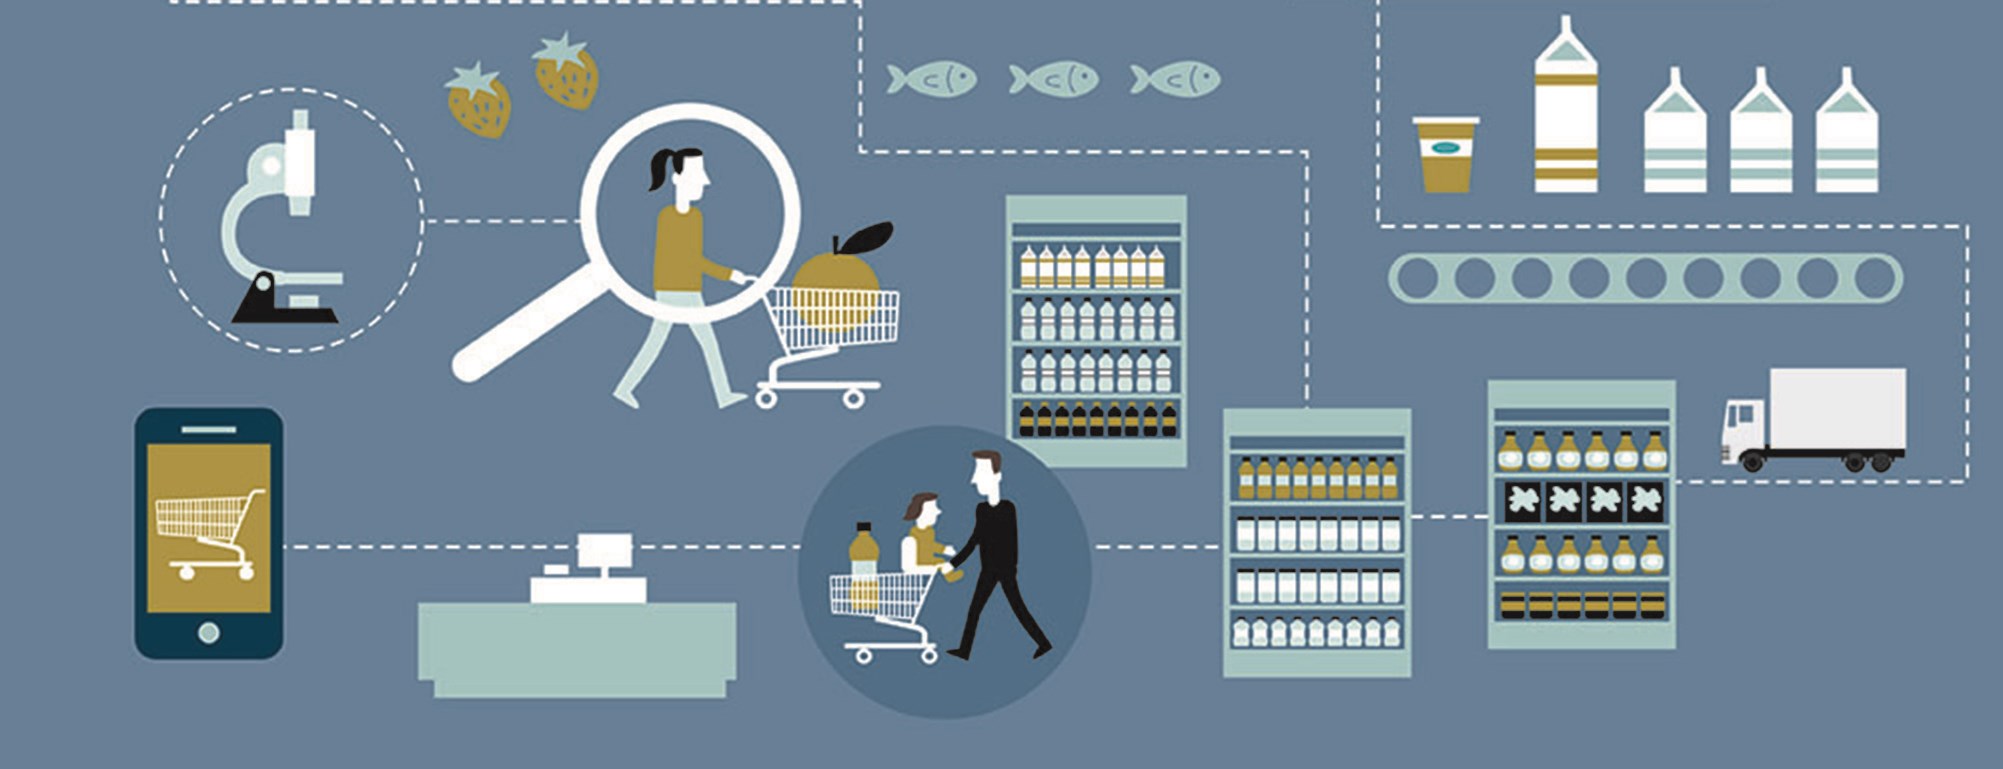 Grocery shopping and supply chains. Illustration by Berit Sømme